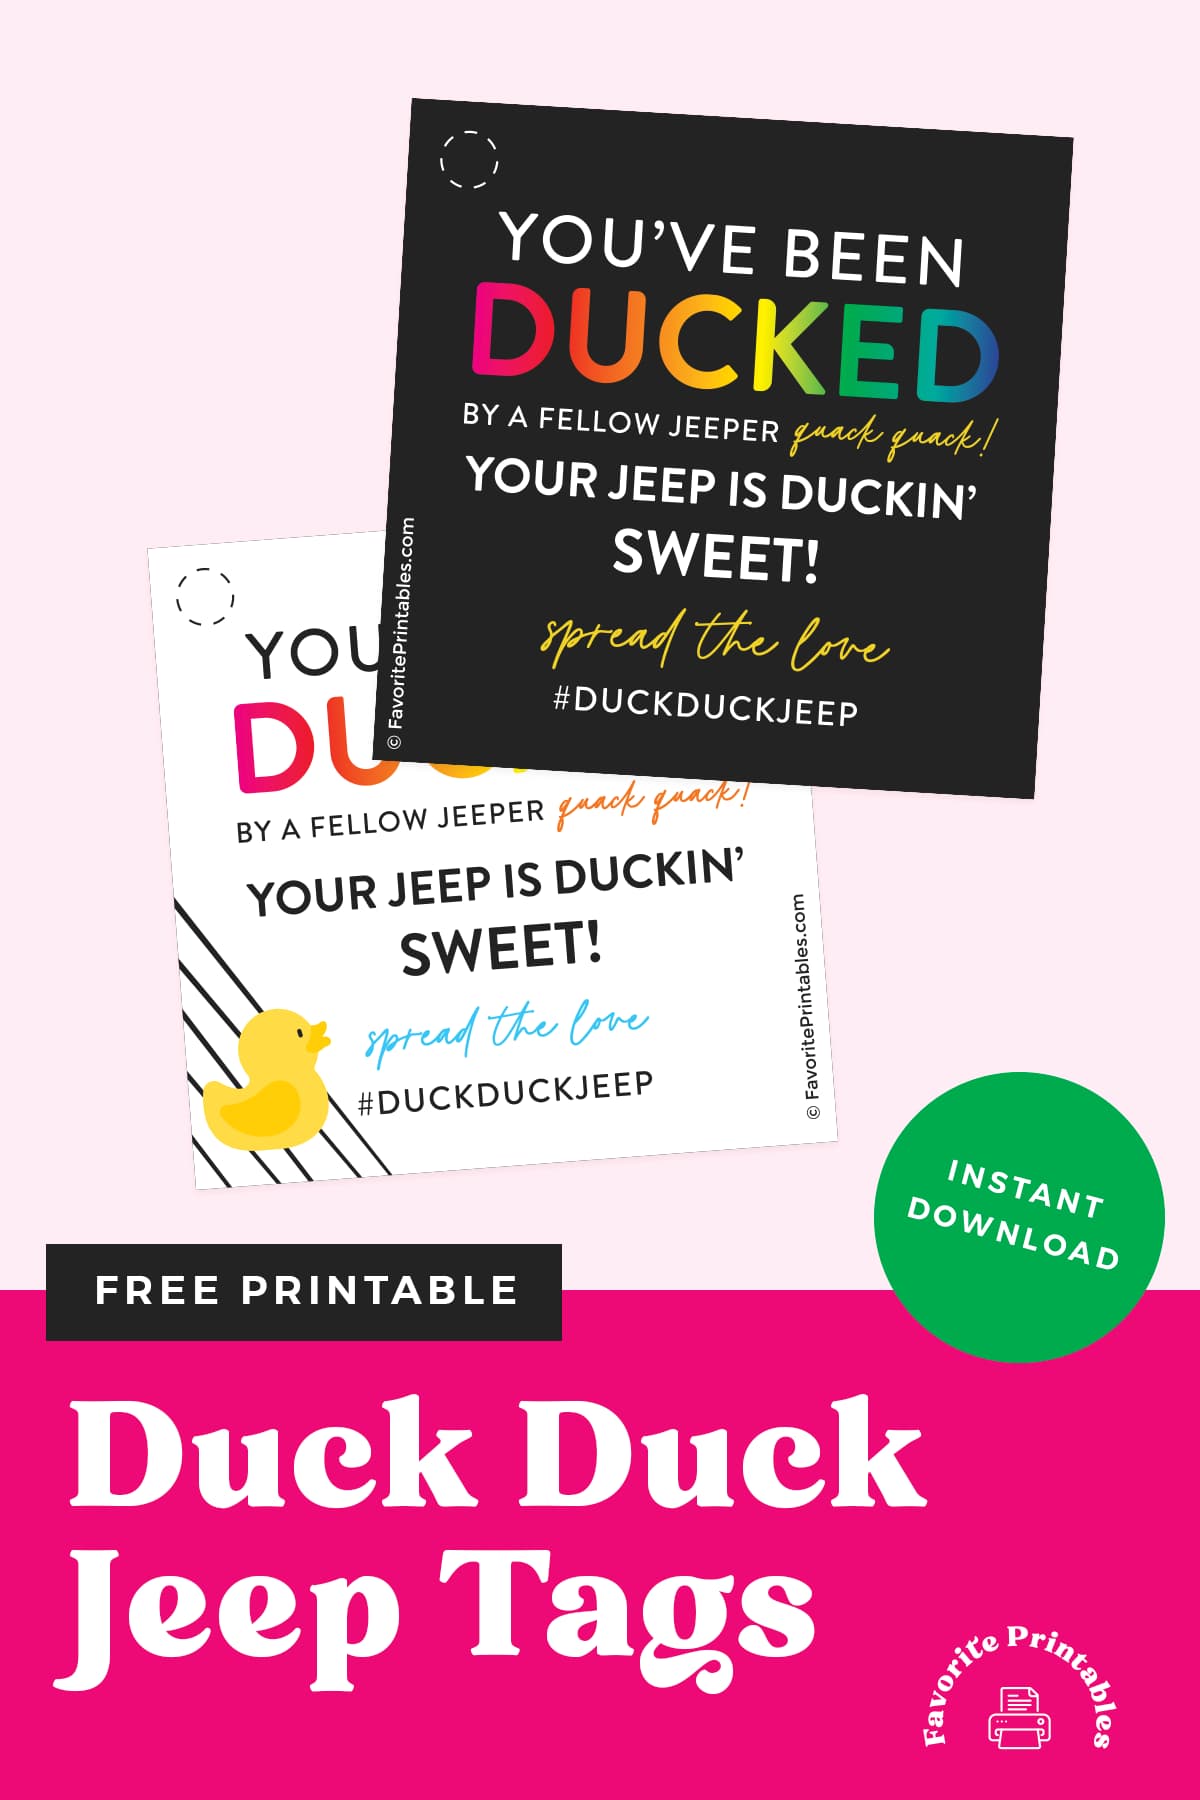 Duck duck jeep tags pin.